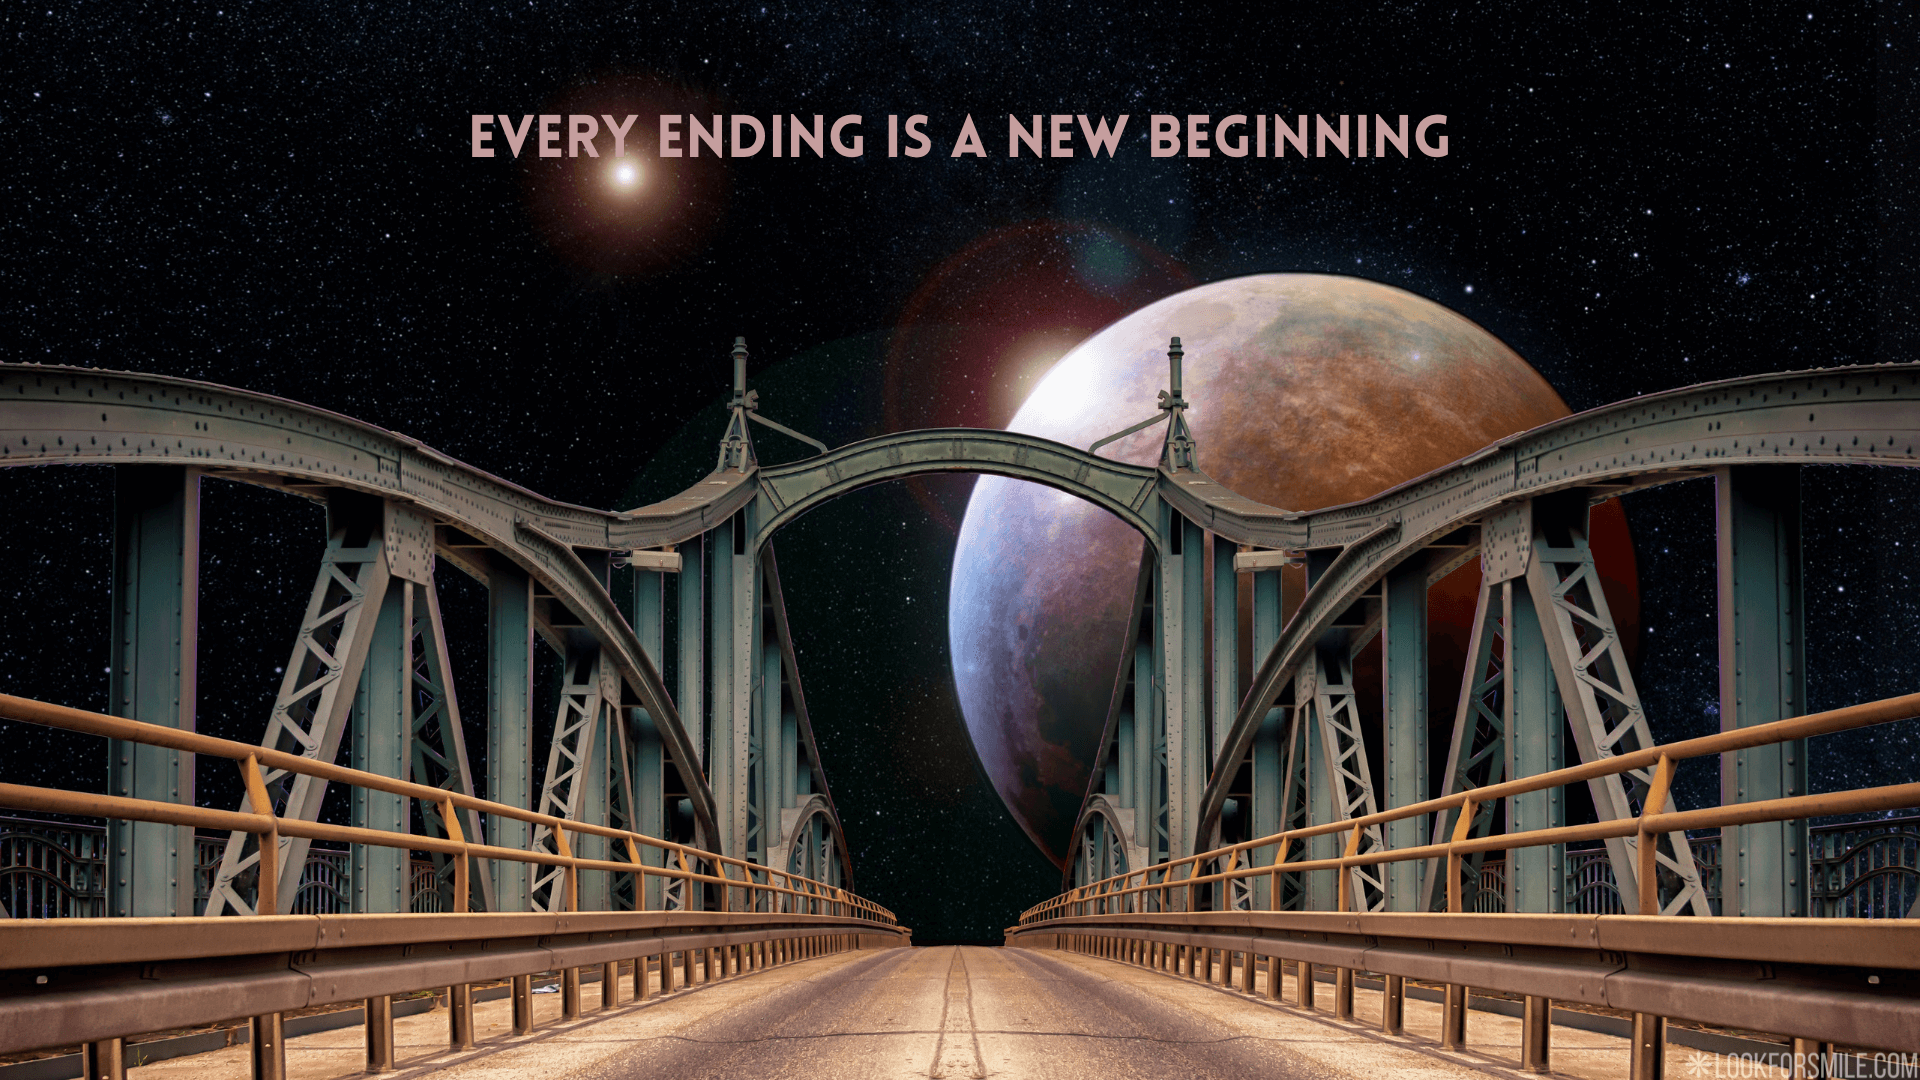 Every ending is a new beginning qoute on graphic image of a bridge and huge moon from a different World – Desktop wallpaper – Lookforsmile.com